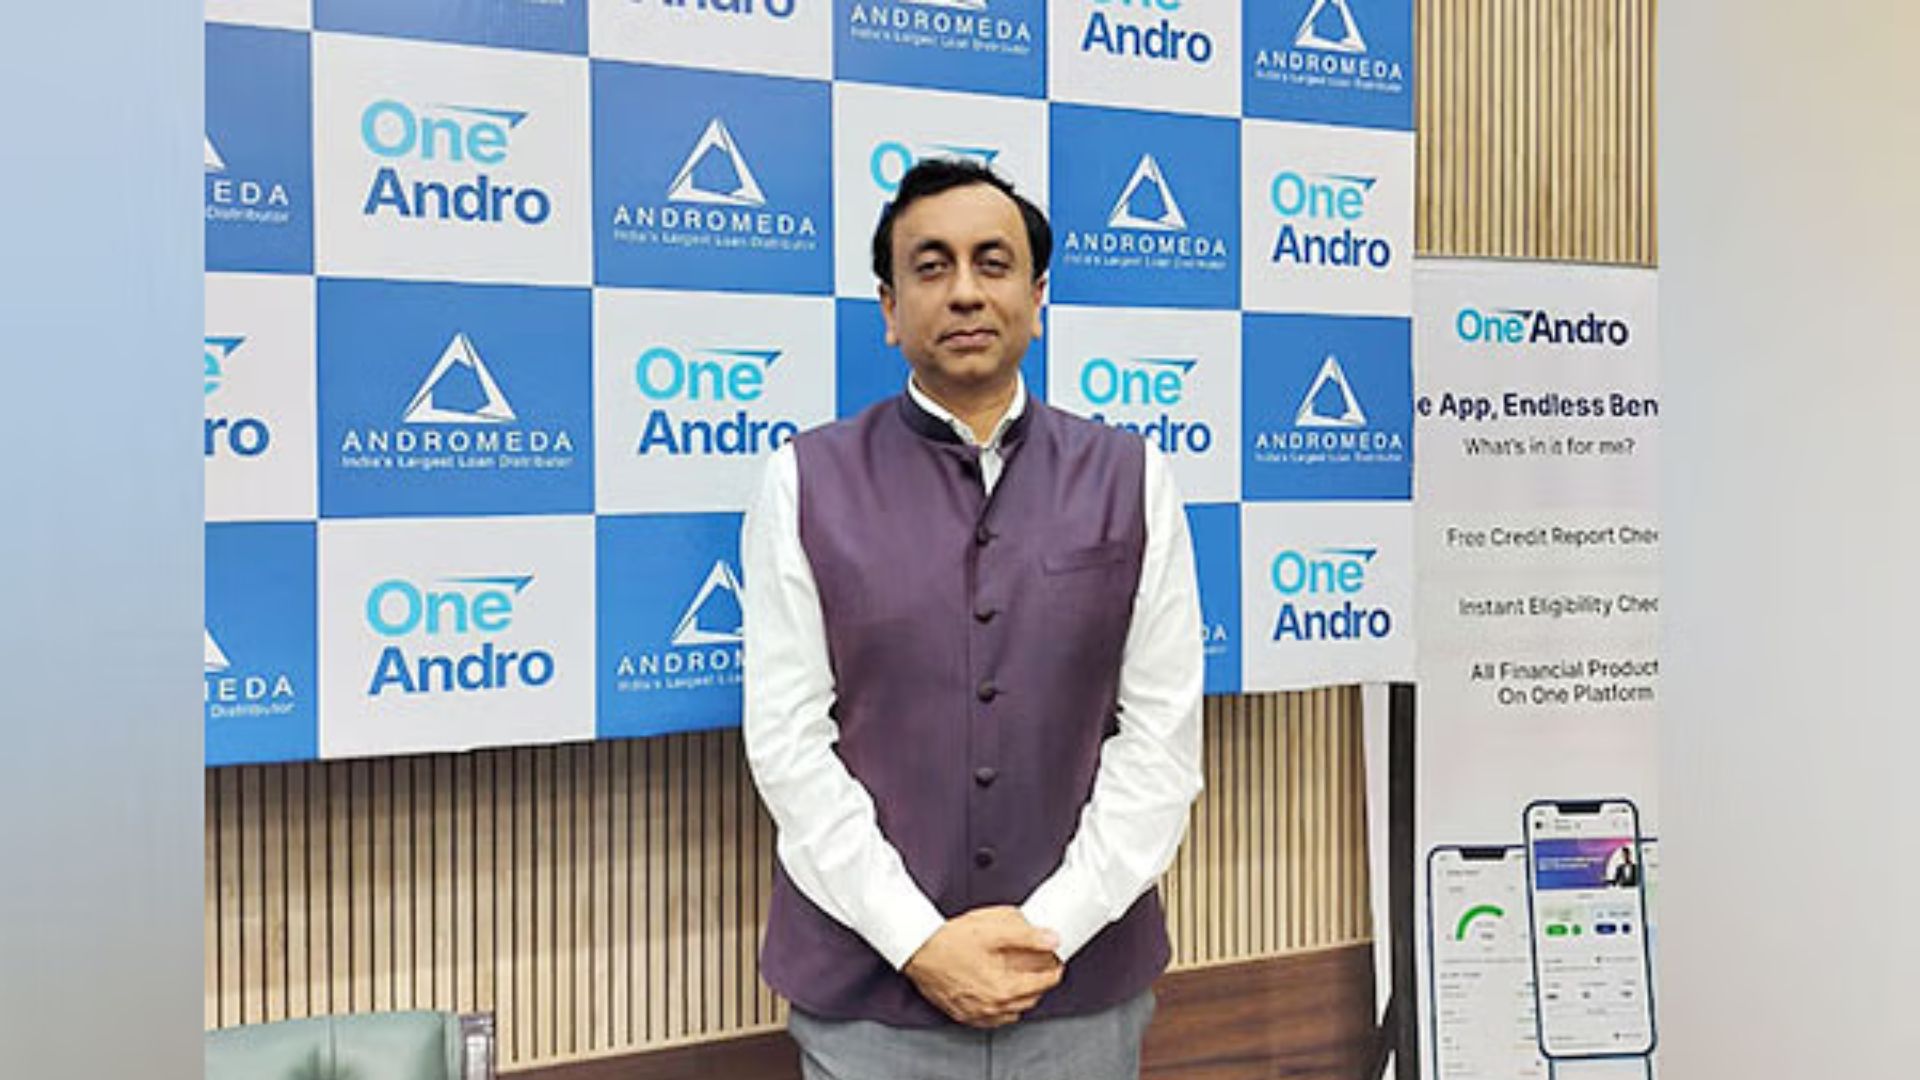 Andromeda Launches ‘OneAndro’ Mobile App for Loan Borrowers and Agents